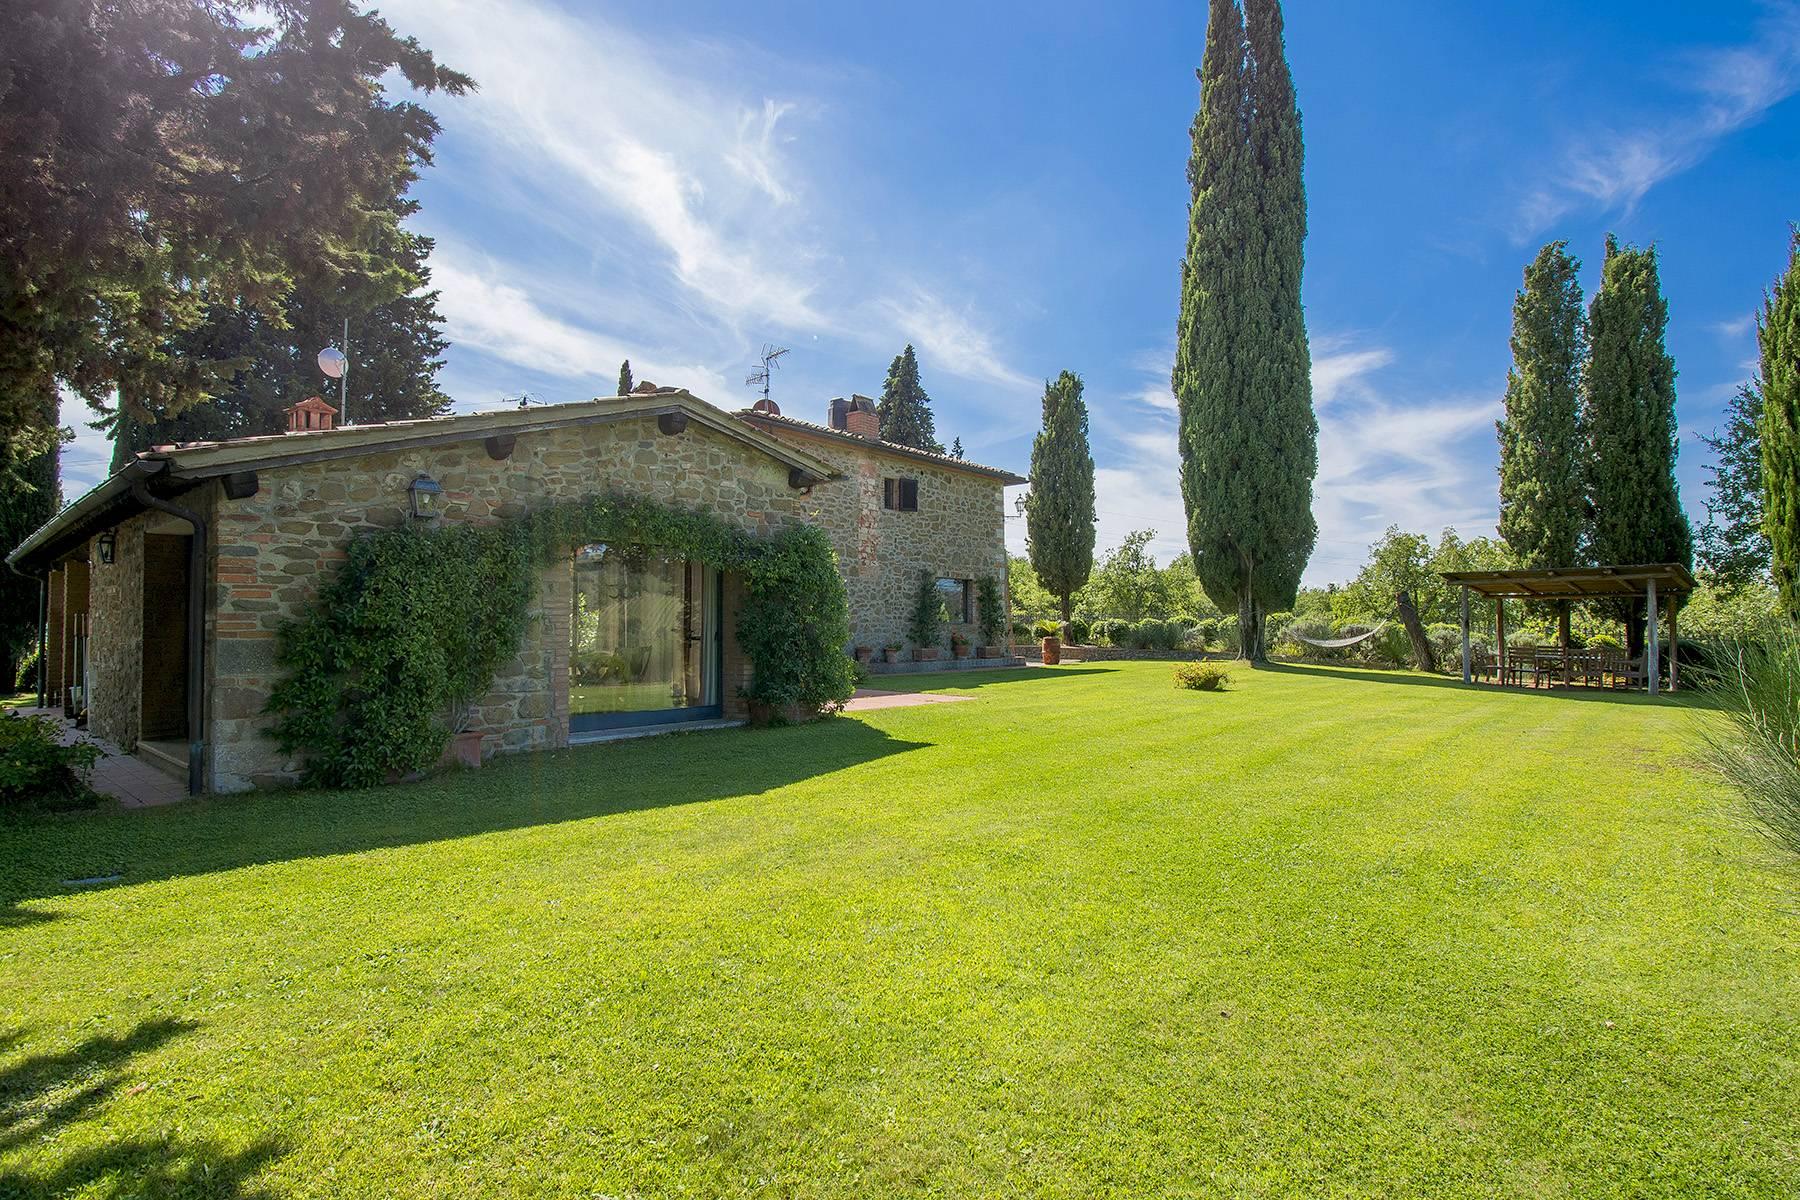 House in the Tuscan Hills for Sale - 3